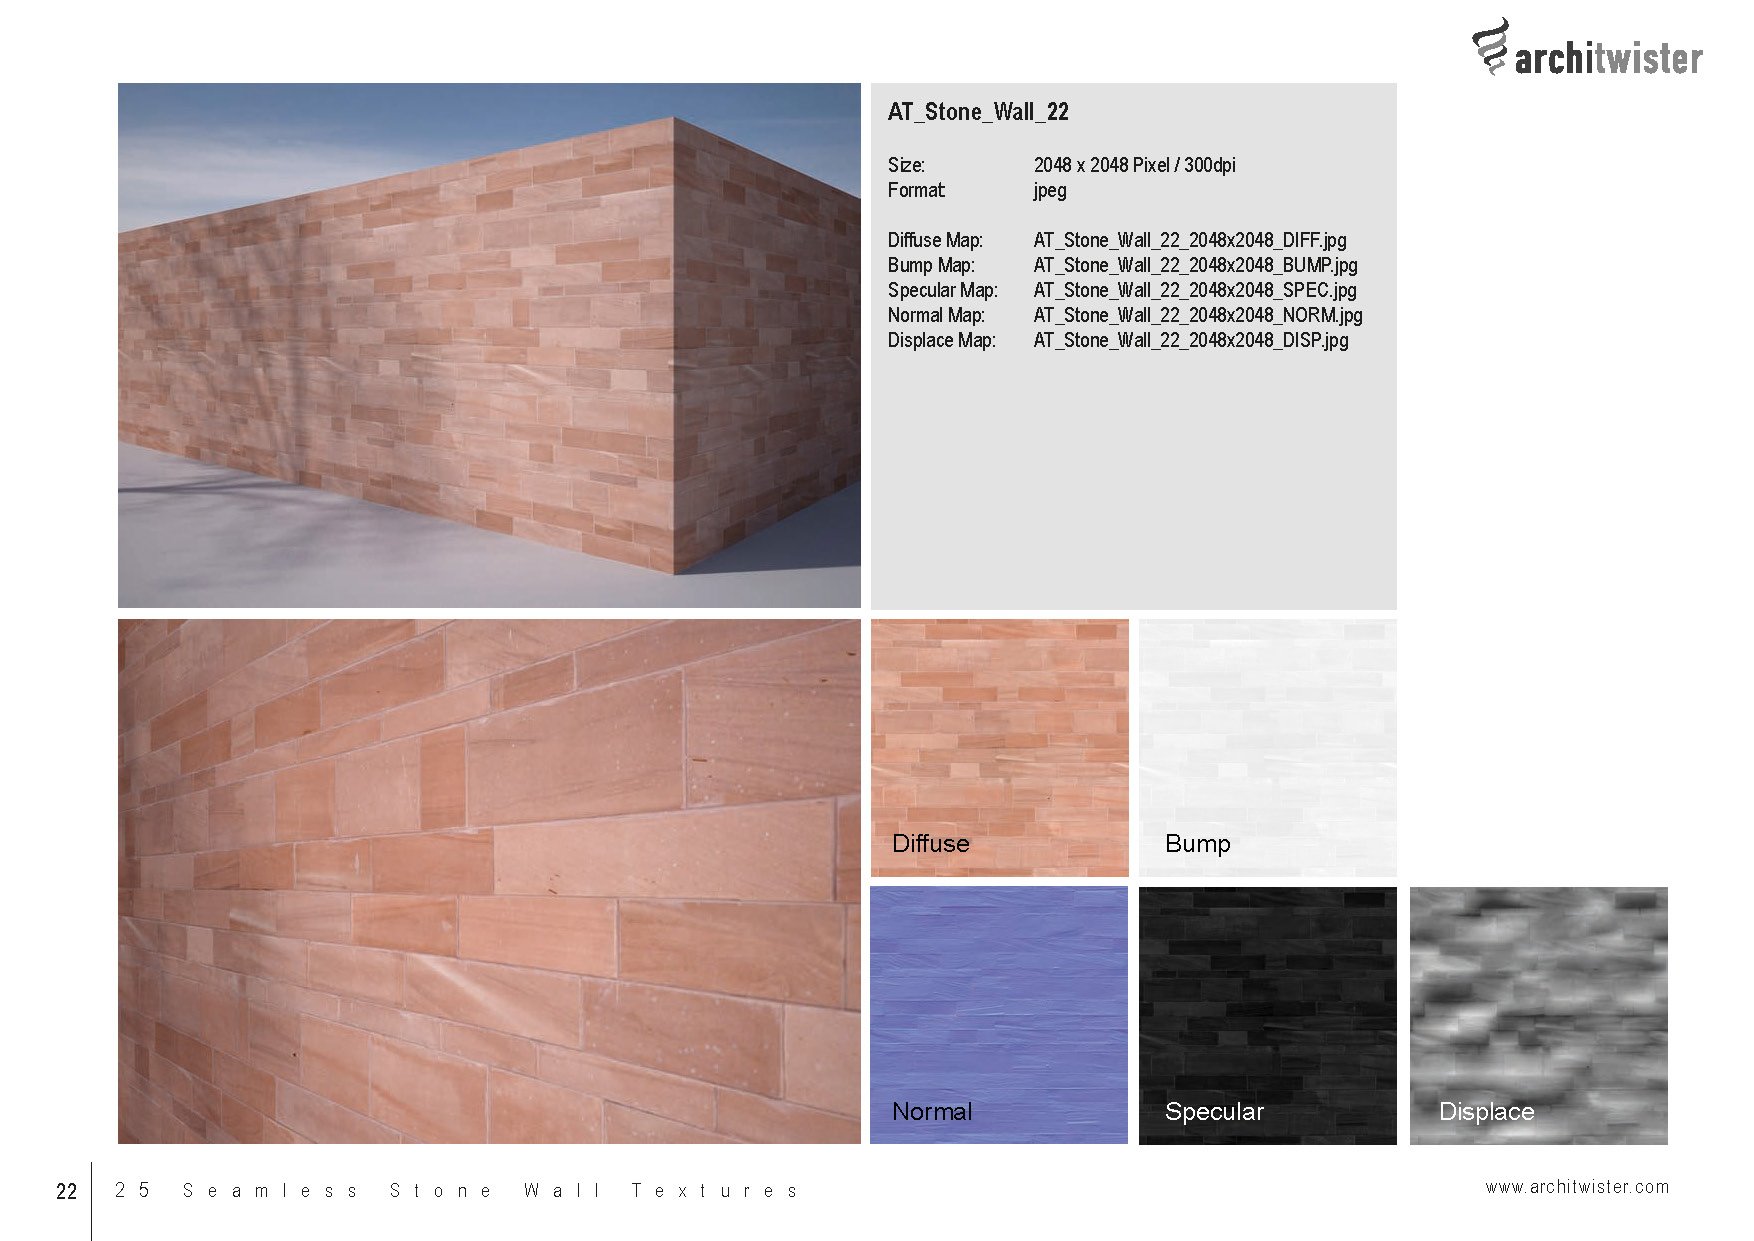 at stone wall textures catalog 01 seite 23 845